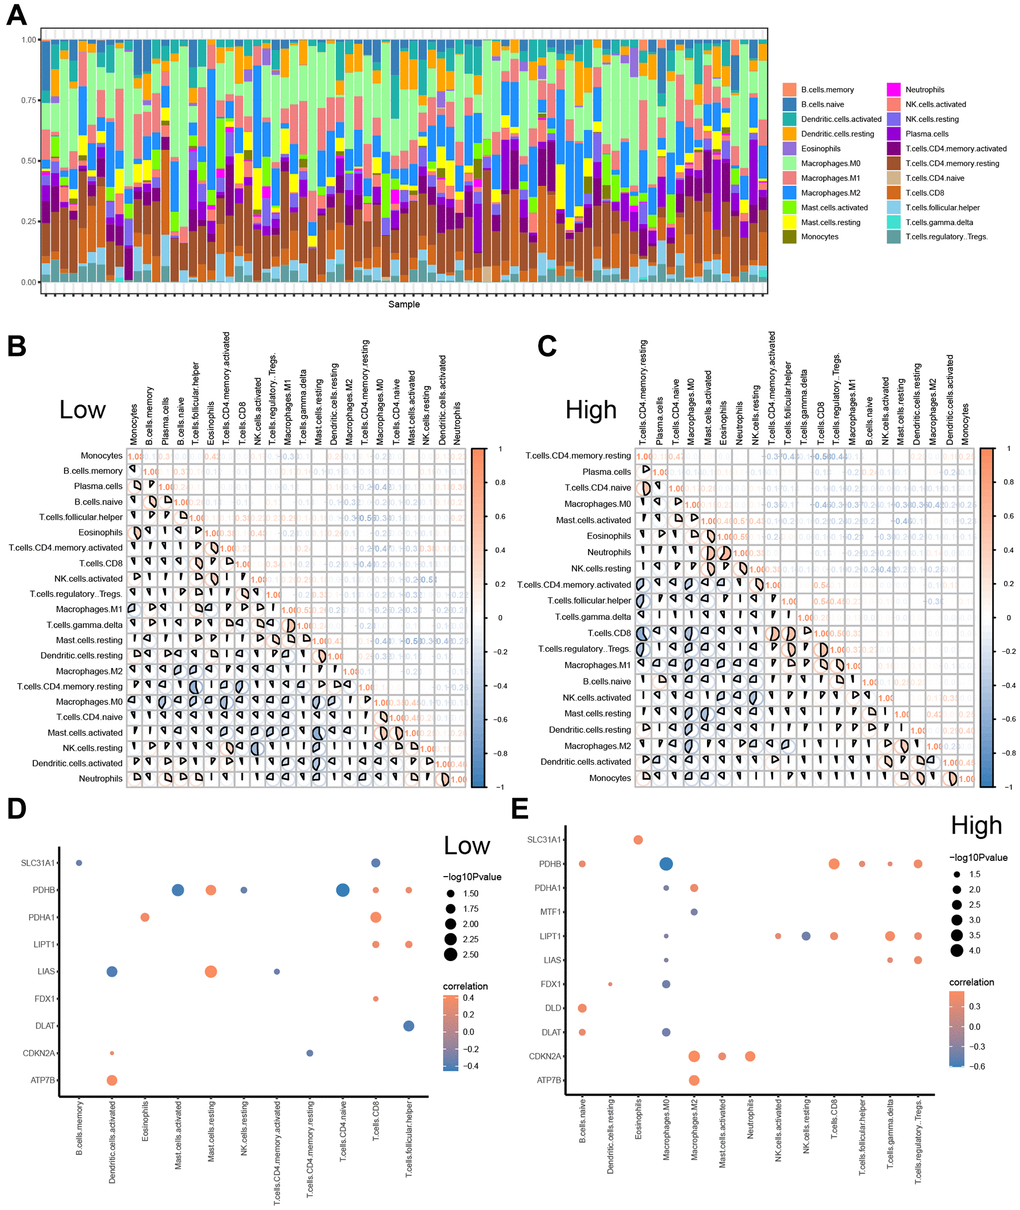 CIBERSORTX for immune cell infiltration analysis between the low-and high-risk groups. (A) Boxplot present the infiltration abundances analysis of immune cells from TCGA-ESCC cohort by CIBERSORT algorithm. (B, C) Correlation analysis among infiltration abundance of immune cells in low-risk group (B) and high-risk group (C) from TCGA-ESCC cohort. (D, E) Correlation analysis between infiltration abundance of immune cells and expression levels of CRGs in low-risk group (D) and high-risk group (E).